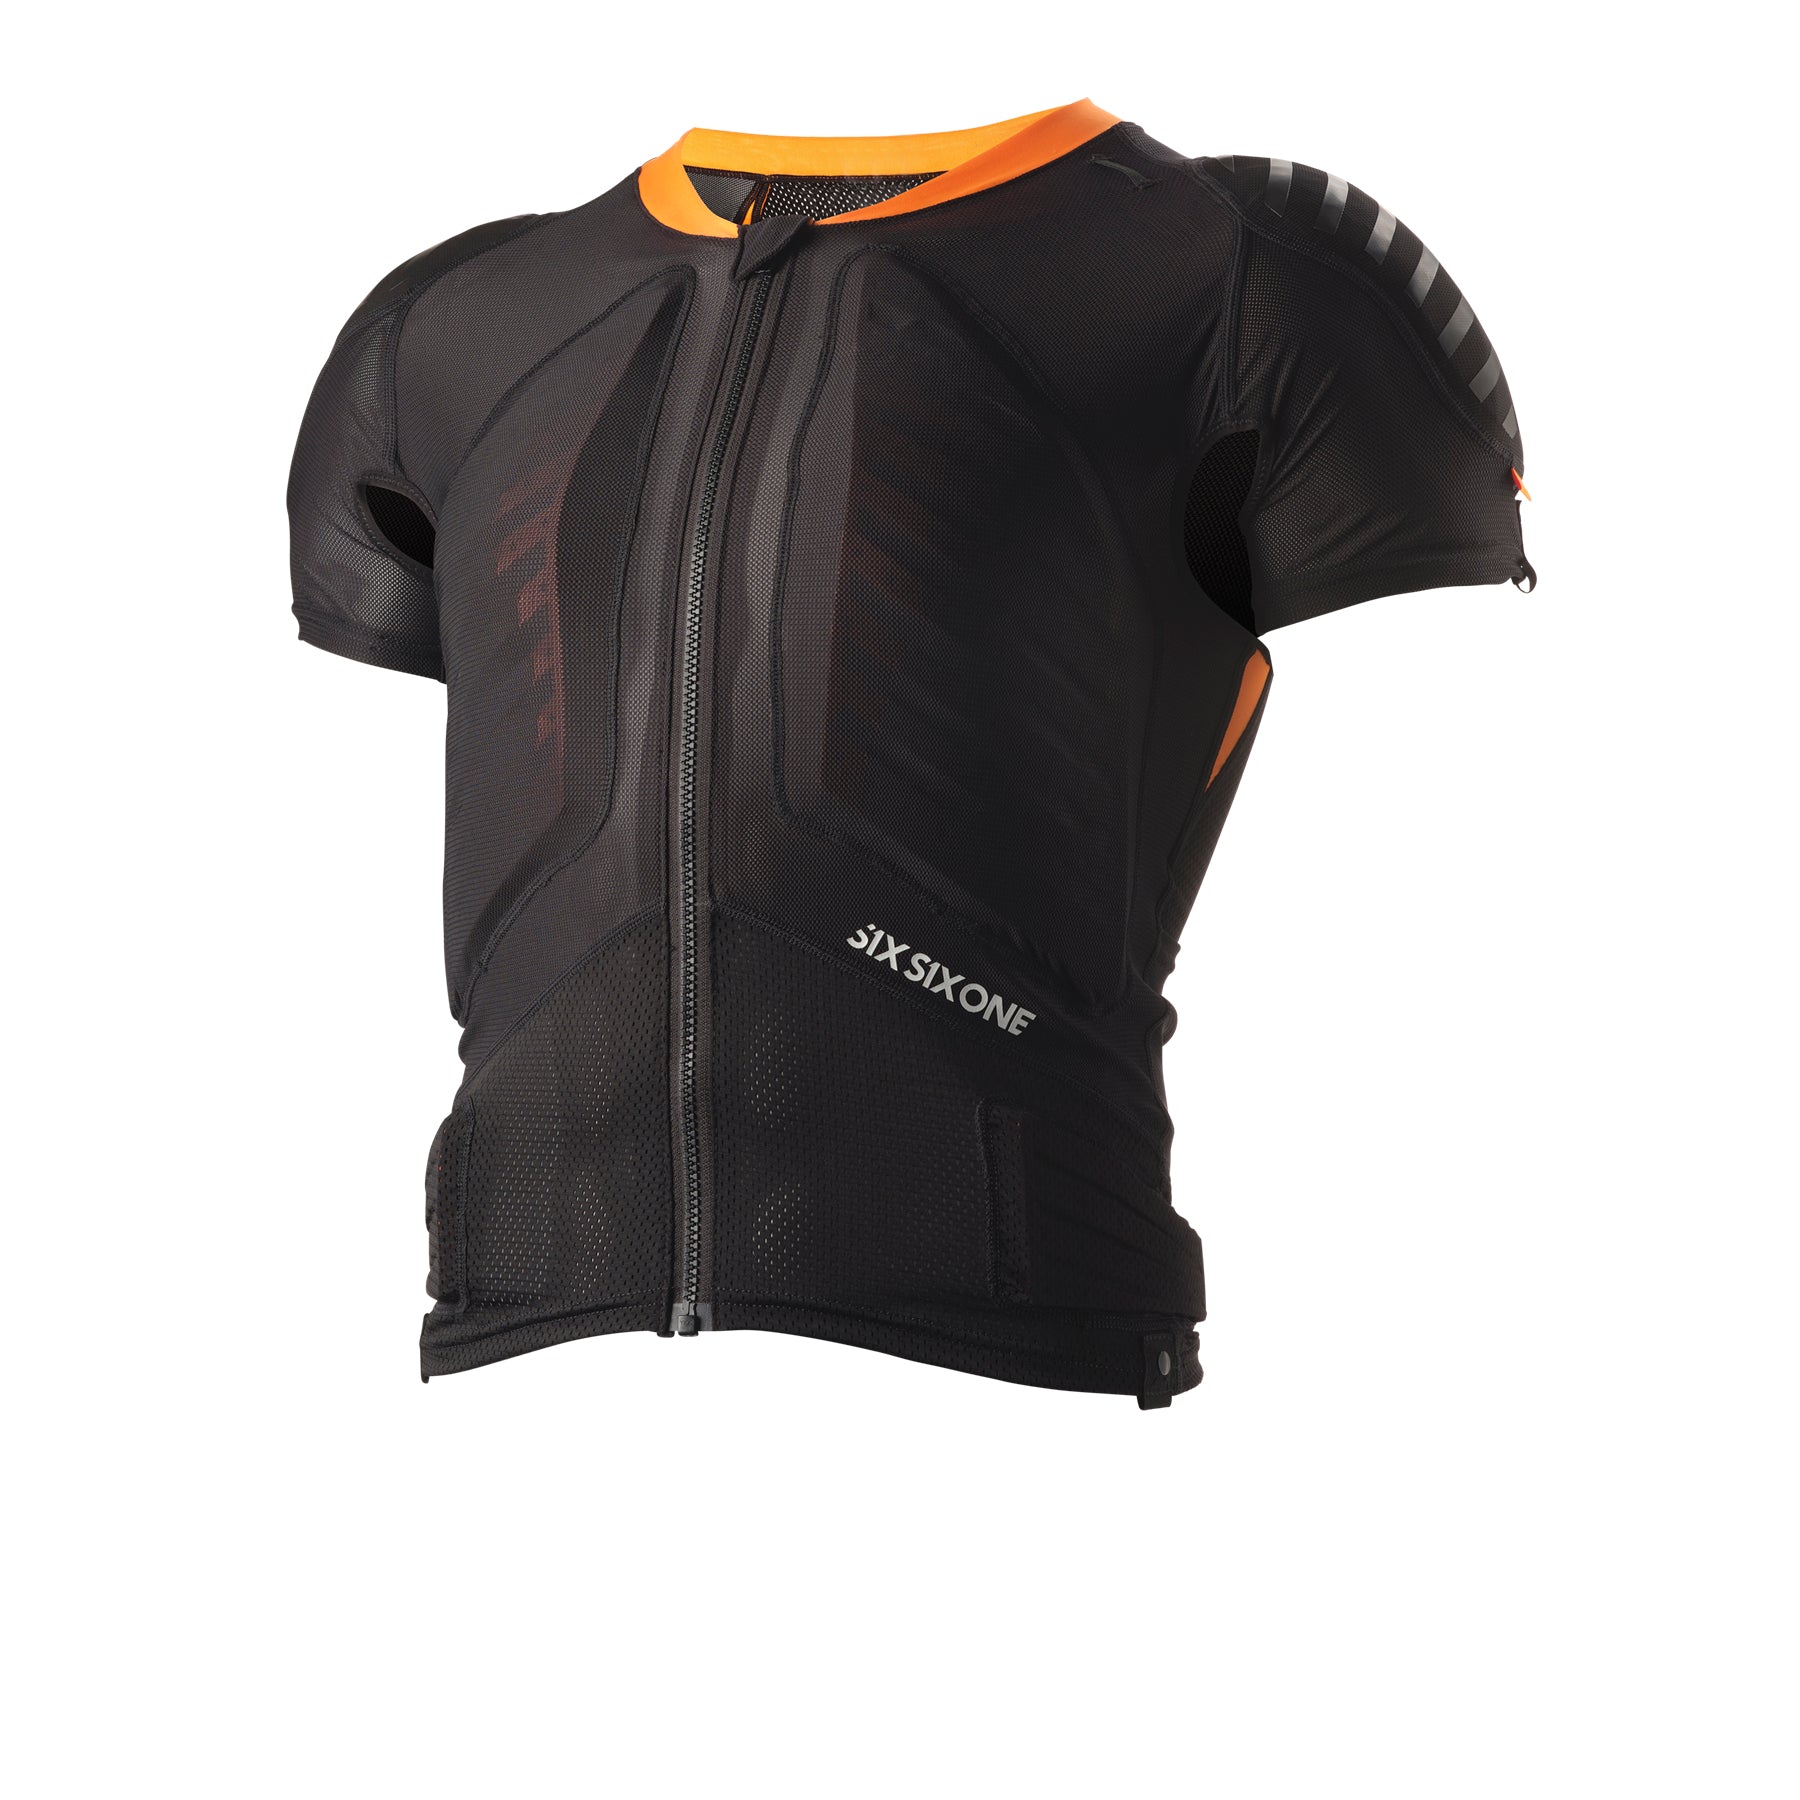 SixSixOne - Featuring strategic D3O® pads and panels, vented compression  fabrics and custom cut mobility patterns @661Protection Evo Compression  body protection is built to ride fast. Available in long or short sleeve